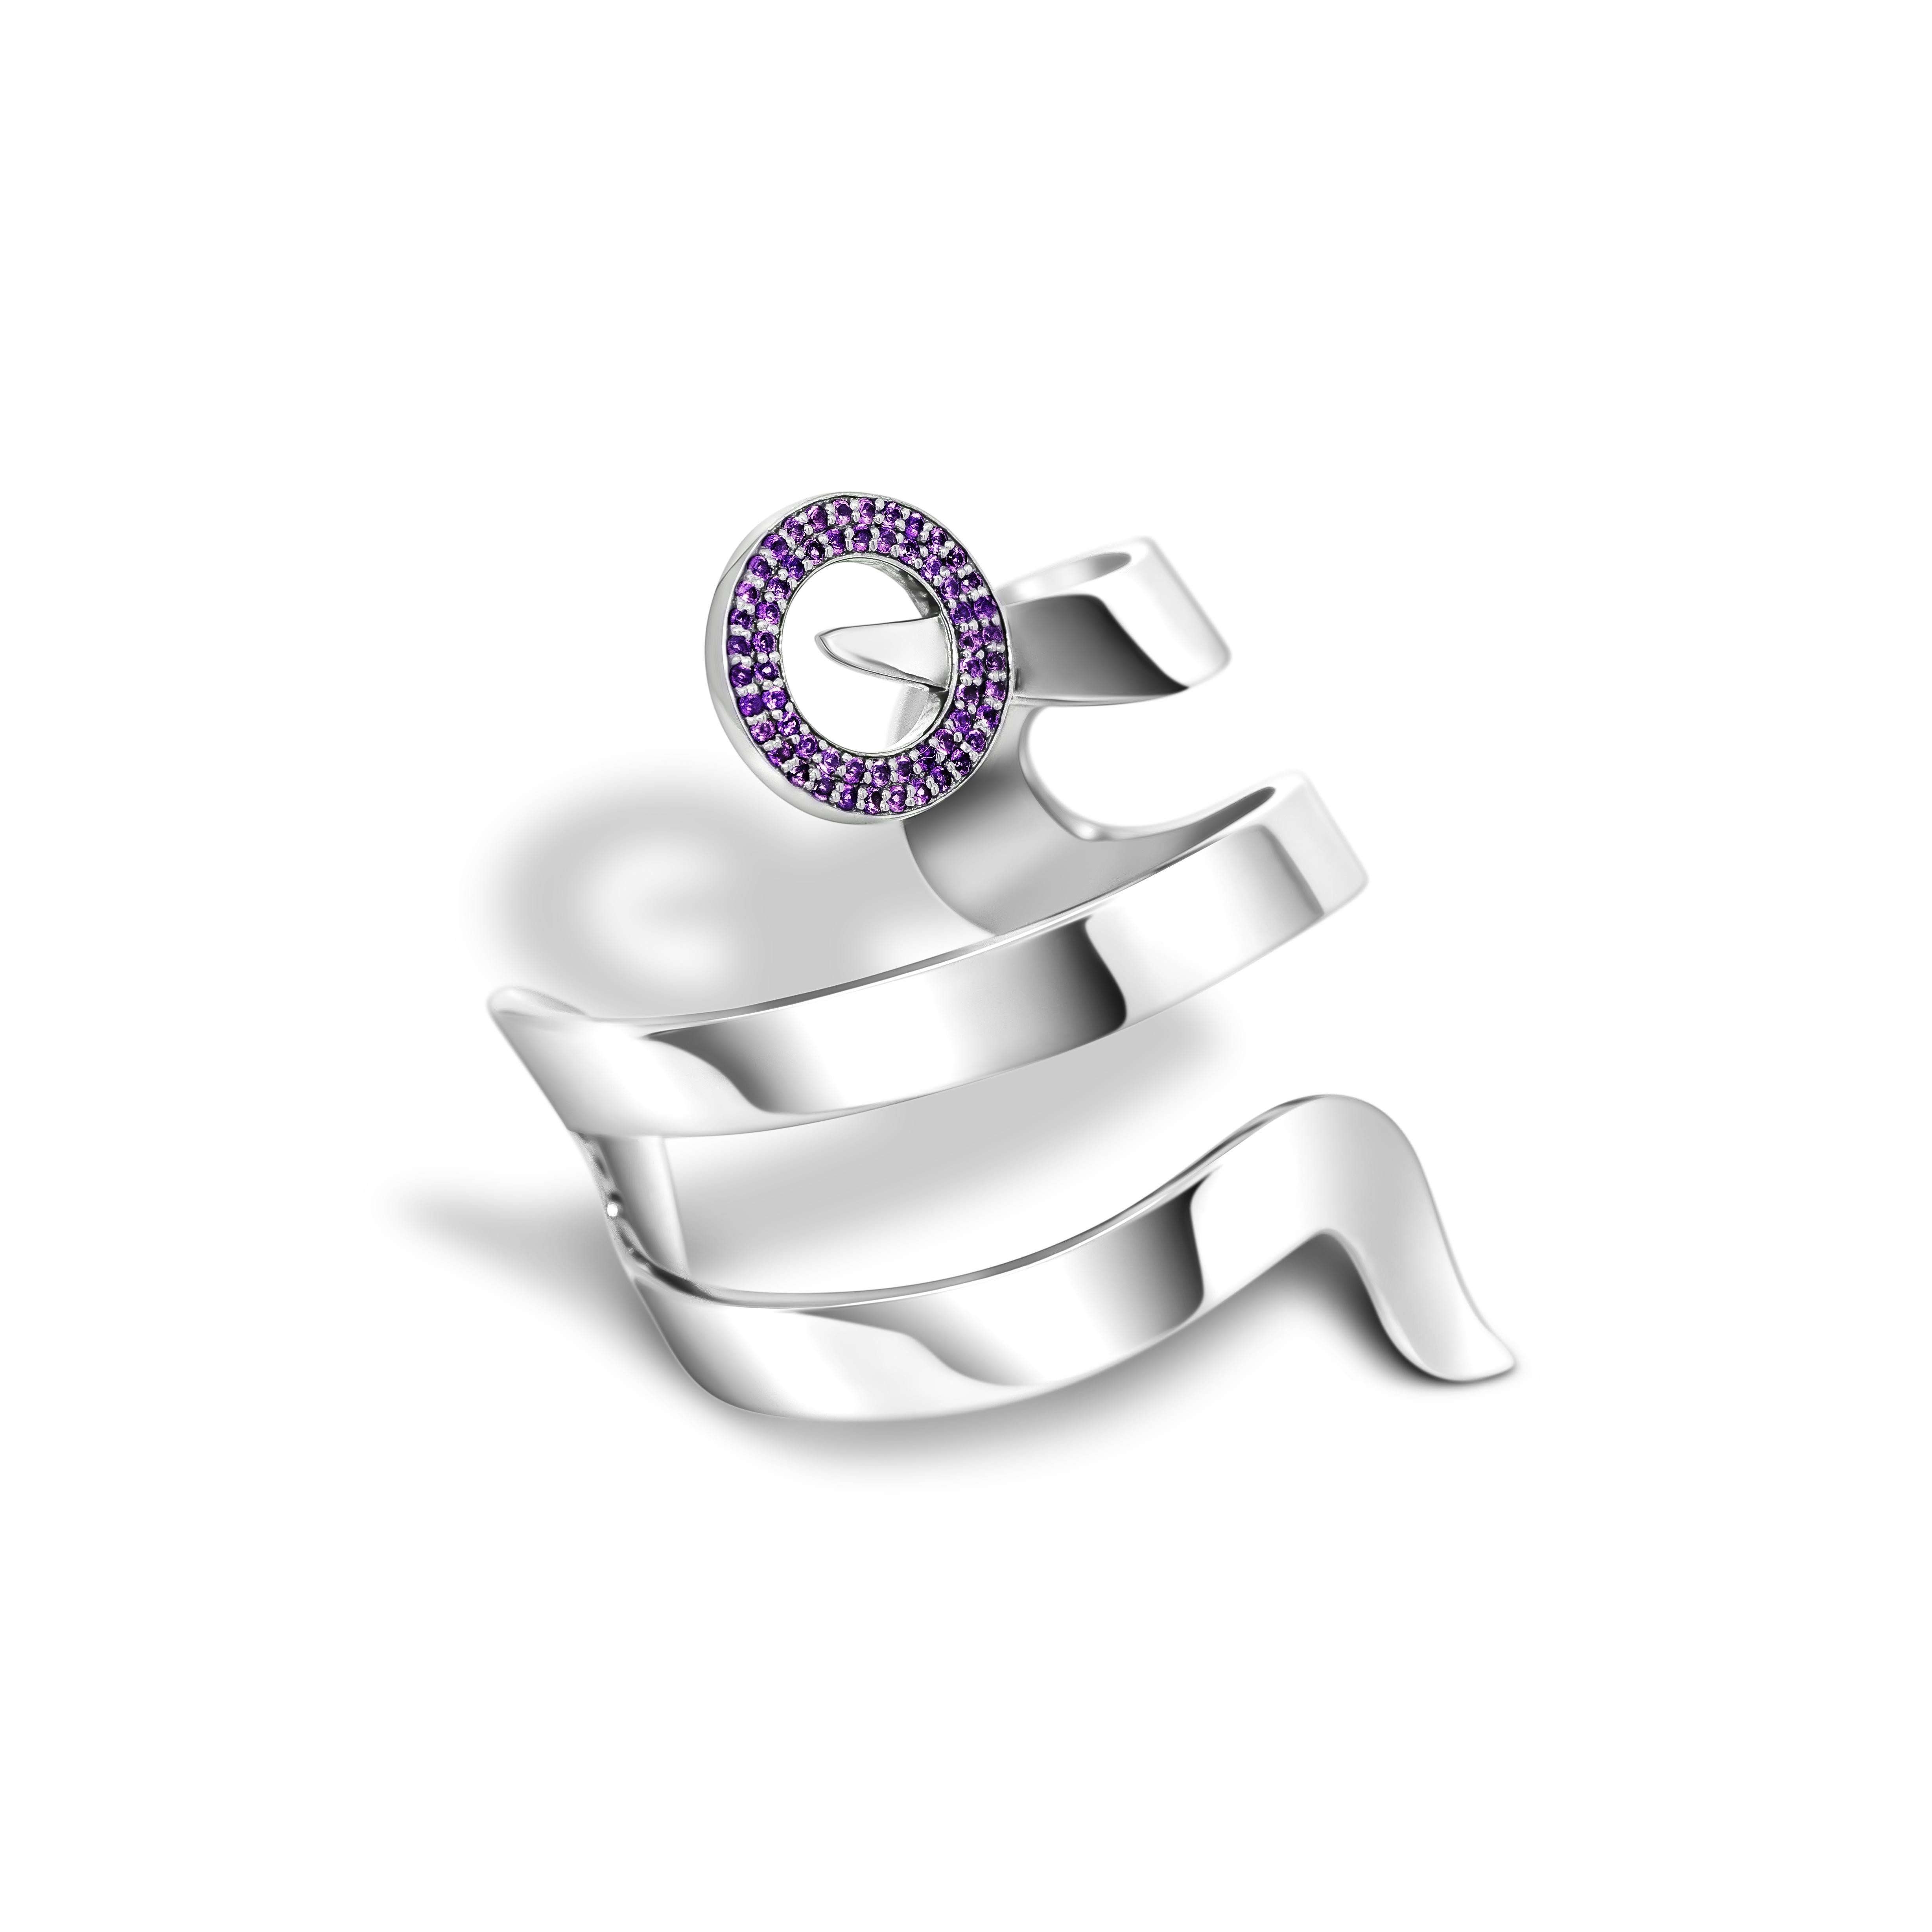 Sculptural Sensuality. Cuff bracelet in polished sterling silver, set with amethyst pave. A contemporary architectural design, where the anthropomorphic sinuosity of the snake combines a minimalist geometry. Shaped to perfectly embrace your